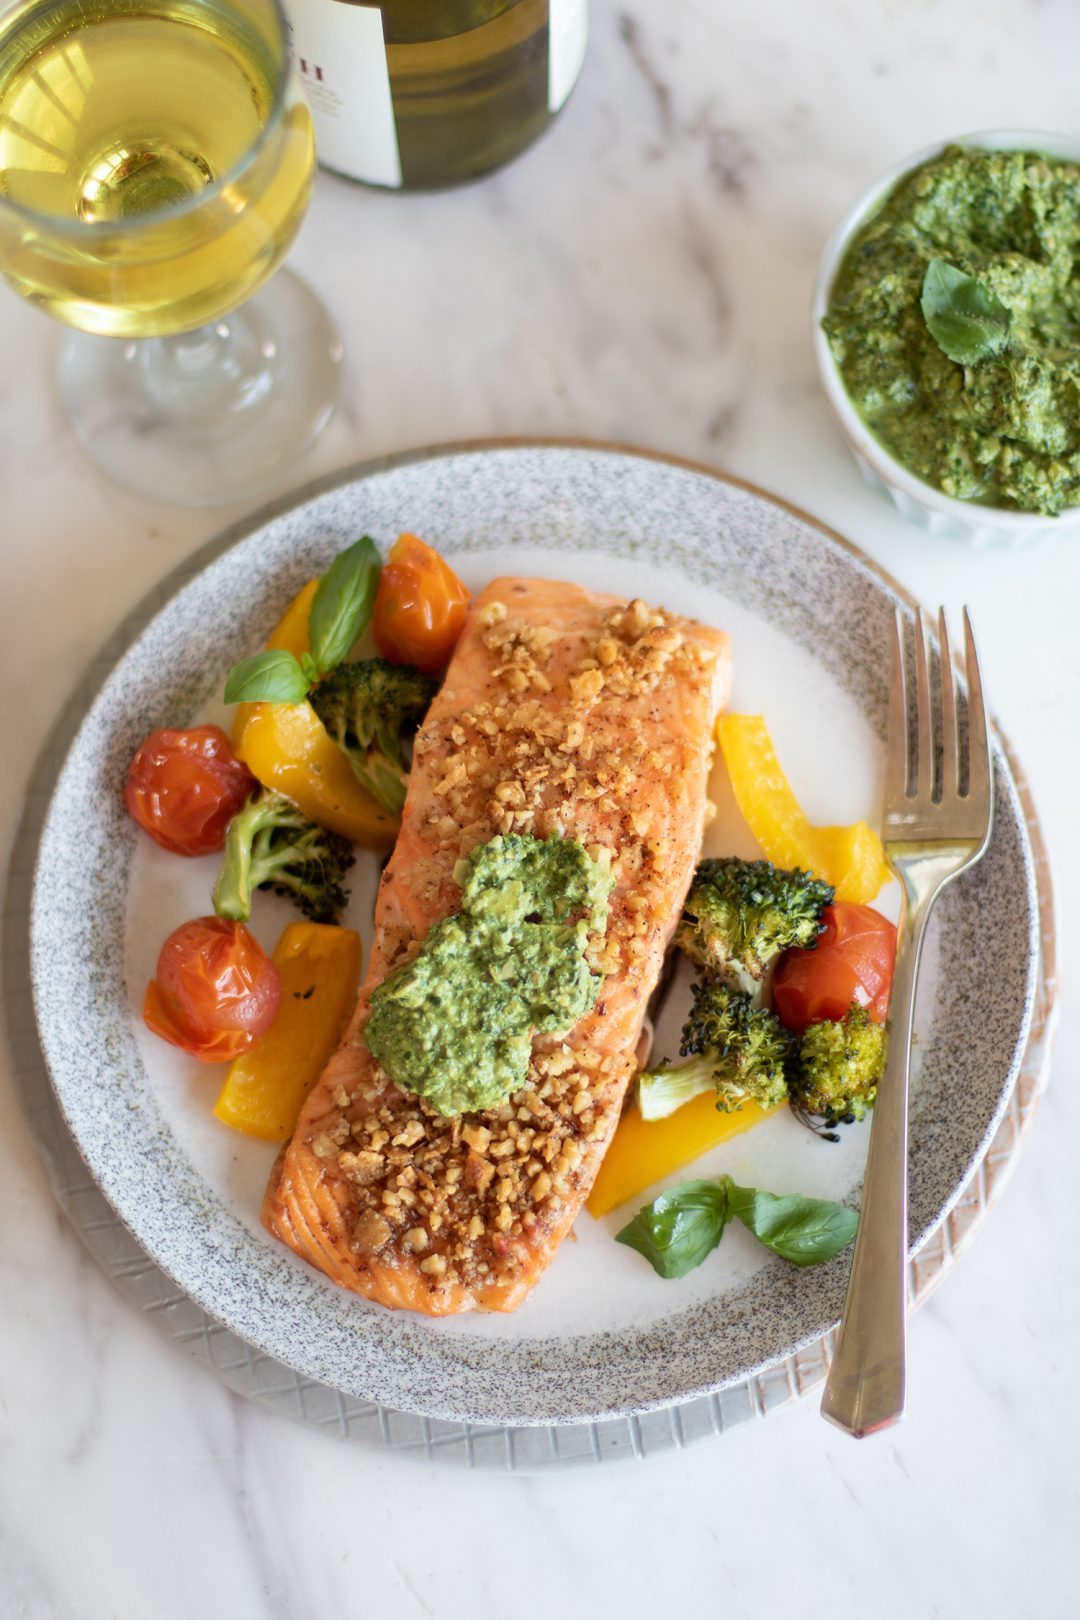 Pesto salmon with vegetables being served.